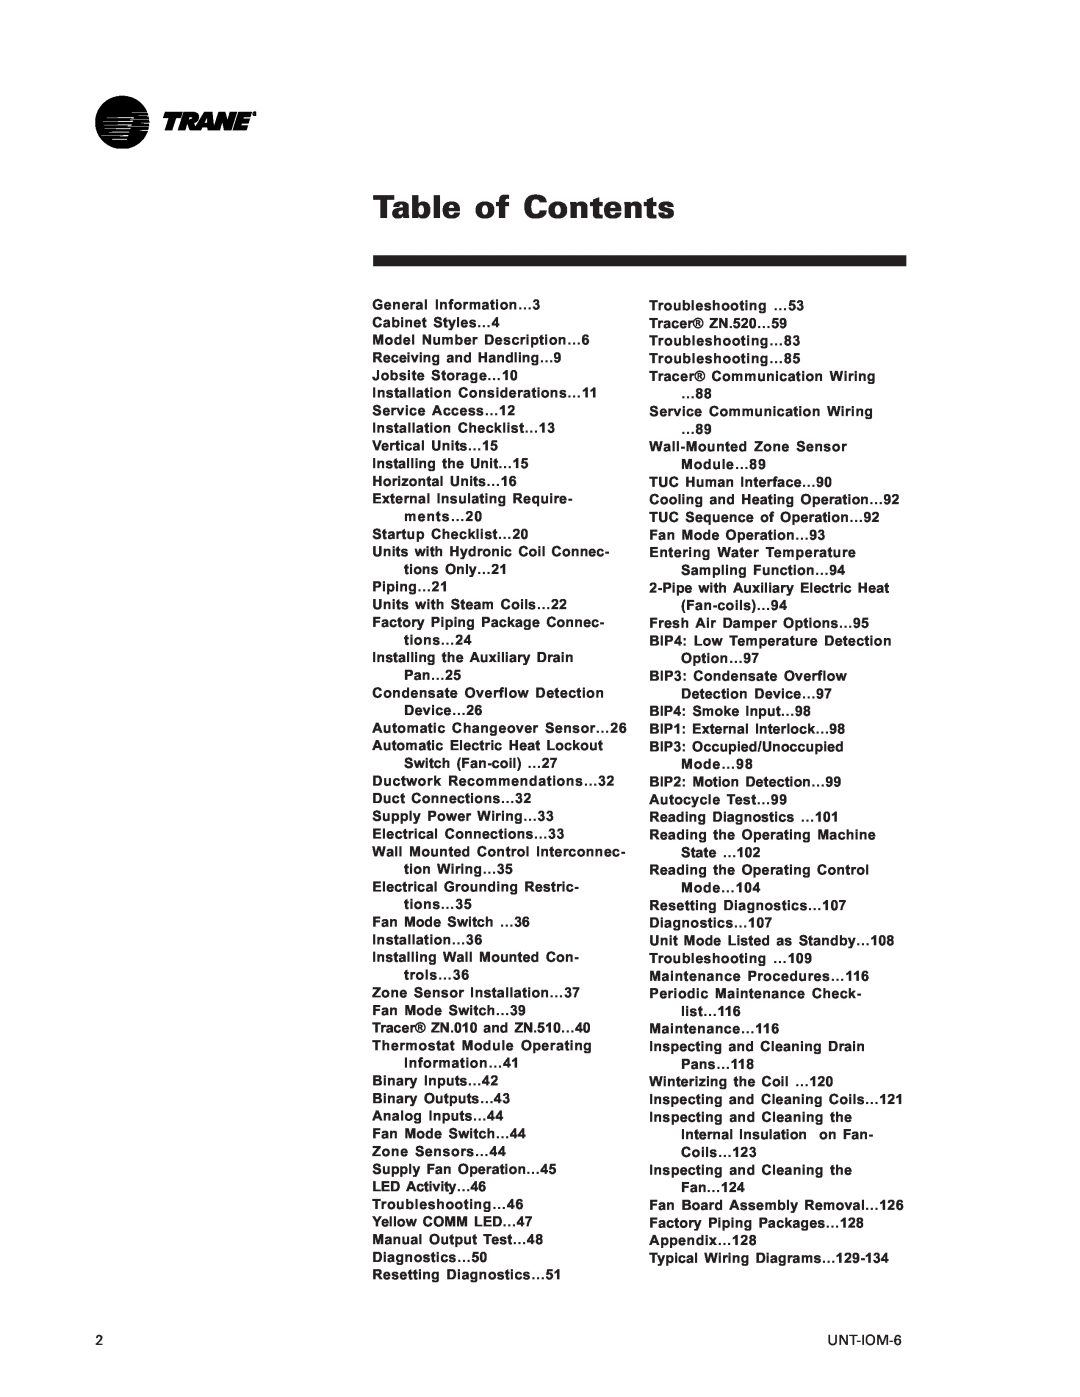 Trane LO manual Table of Contents 